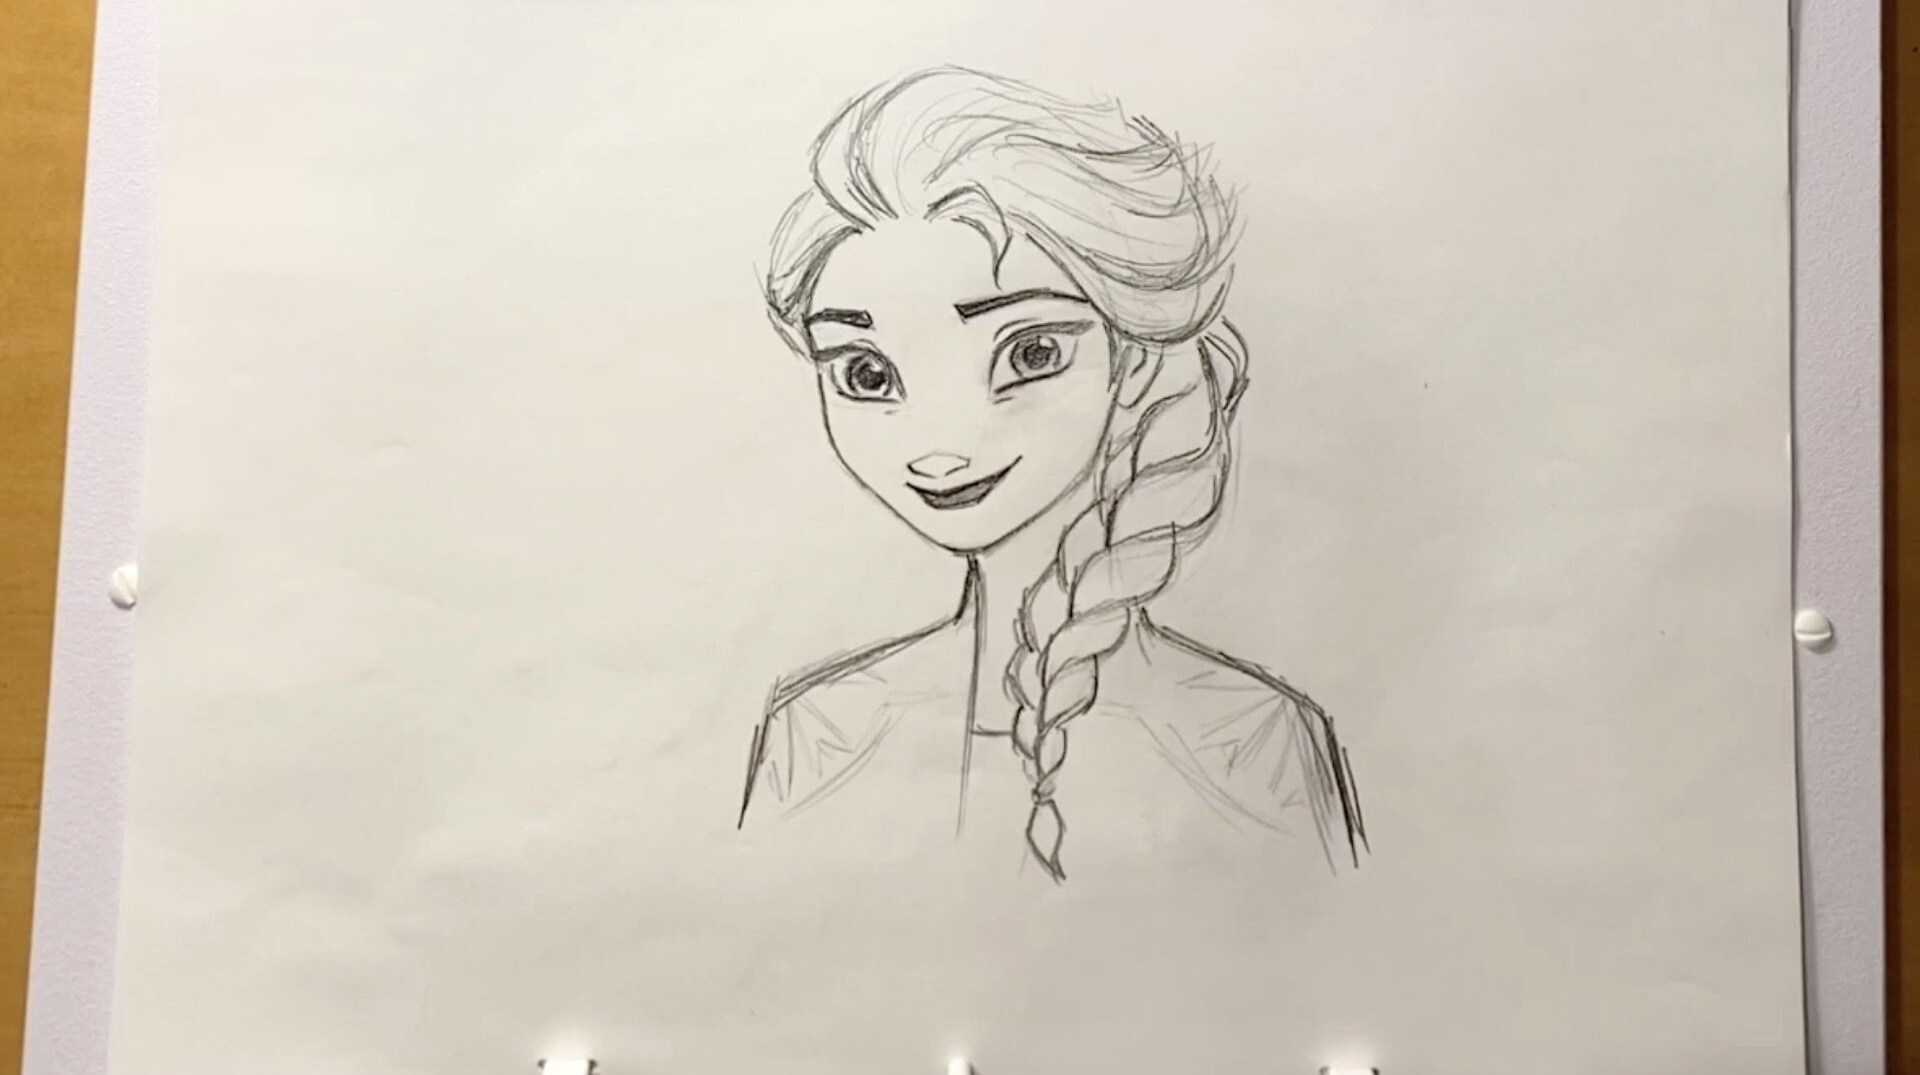 How to Draw Elsa from Frozen 2 l Draw With Disney Animation